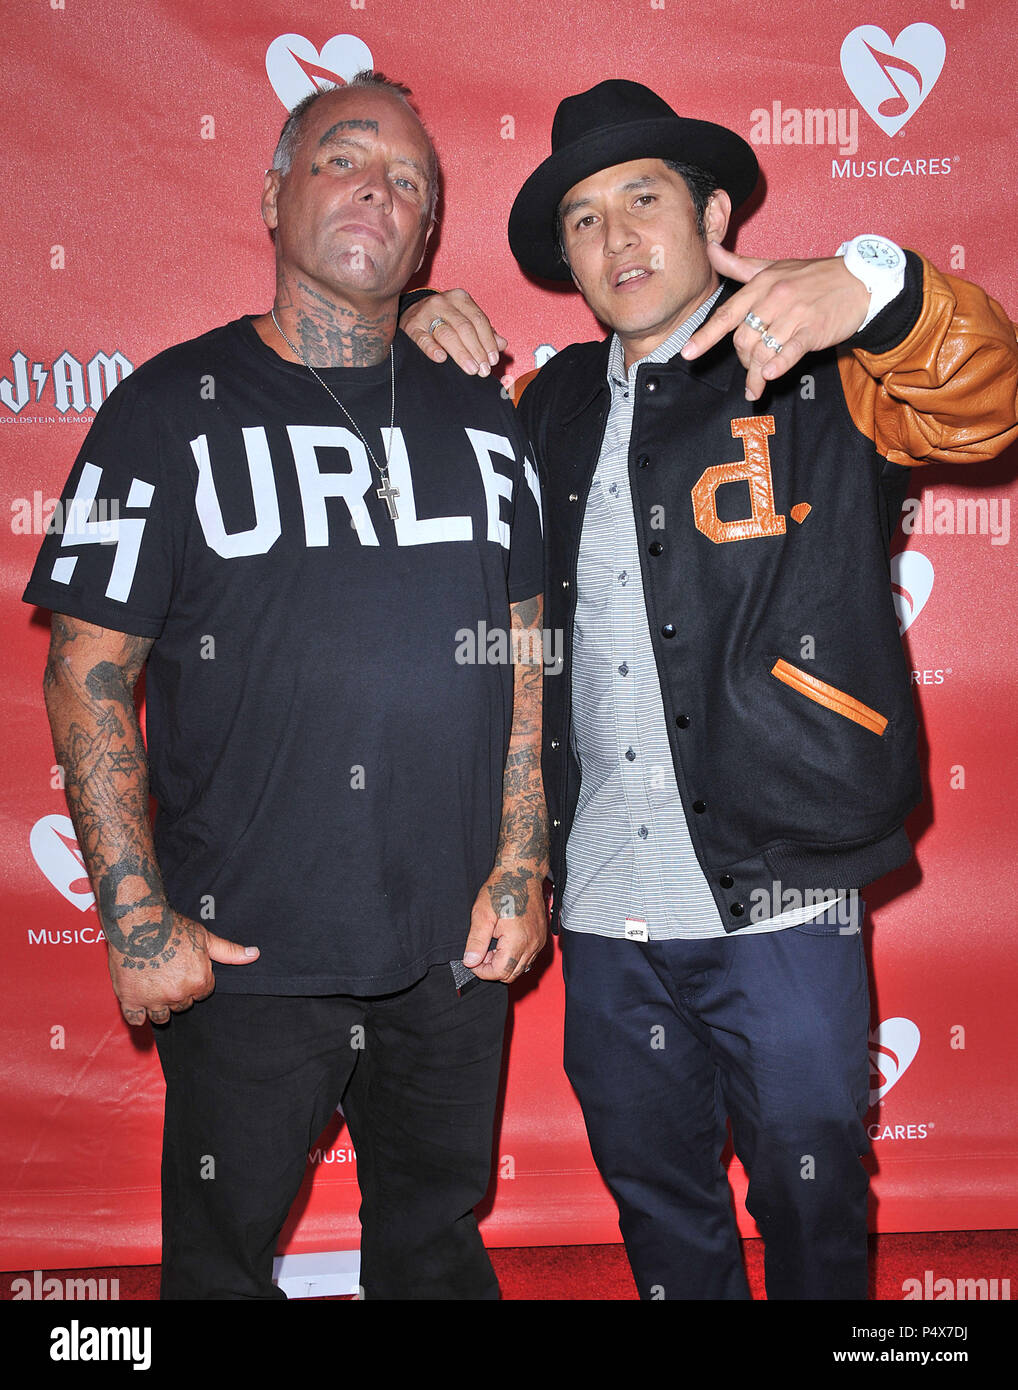 Jay Adams and Christian Hosoi arriving at Musicares Benefit at the Club Nokia in Los Angeles.Jay Adams and Christian Hosoi  Event in Hollywood Life - California, Red Carpet Event, USA, Film Industry, Celebrities, Photography, Bestof, Arts Culture and Entertainment, Topix Celebrities fashion, Best of, Hollywood Life, Event in Hollywood Life - California, Red Carpet and backstage, movie celebrities, TV celebrities, Music celebrities, Topix, actors from the same movie, cast and co star together.  inquiry tsuni@Gamma-USA.com, Credit Tsuni / USA, 2013 - Group, TV and movie cast Stock Photo